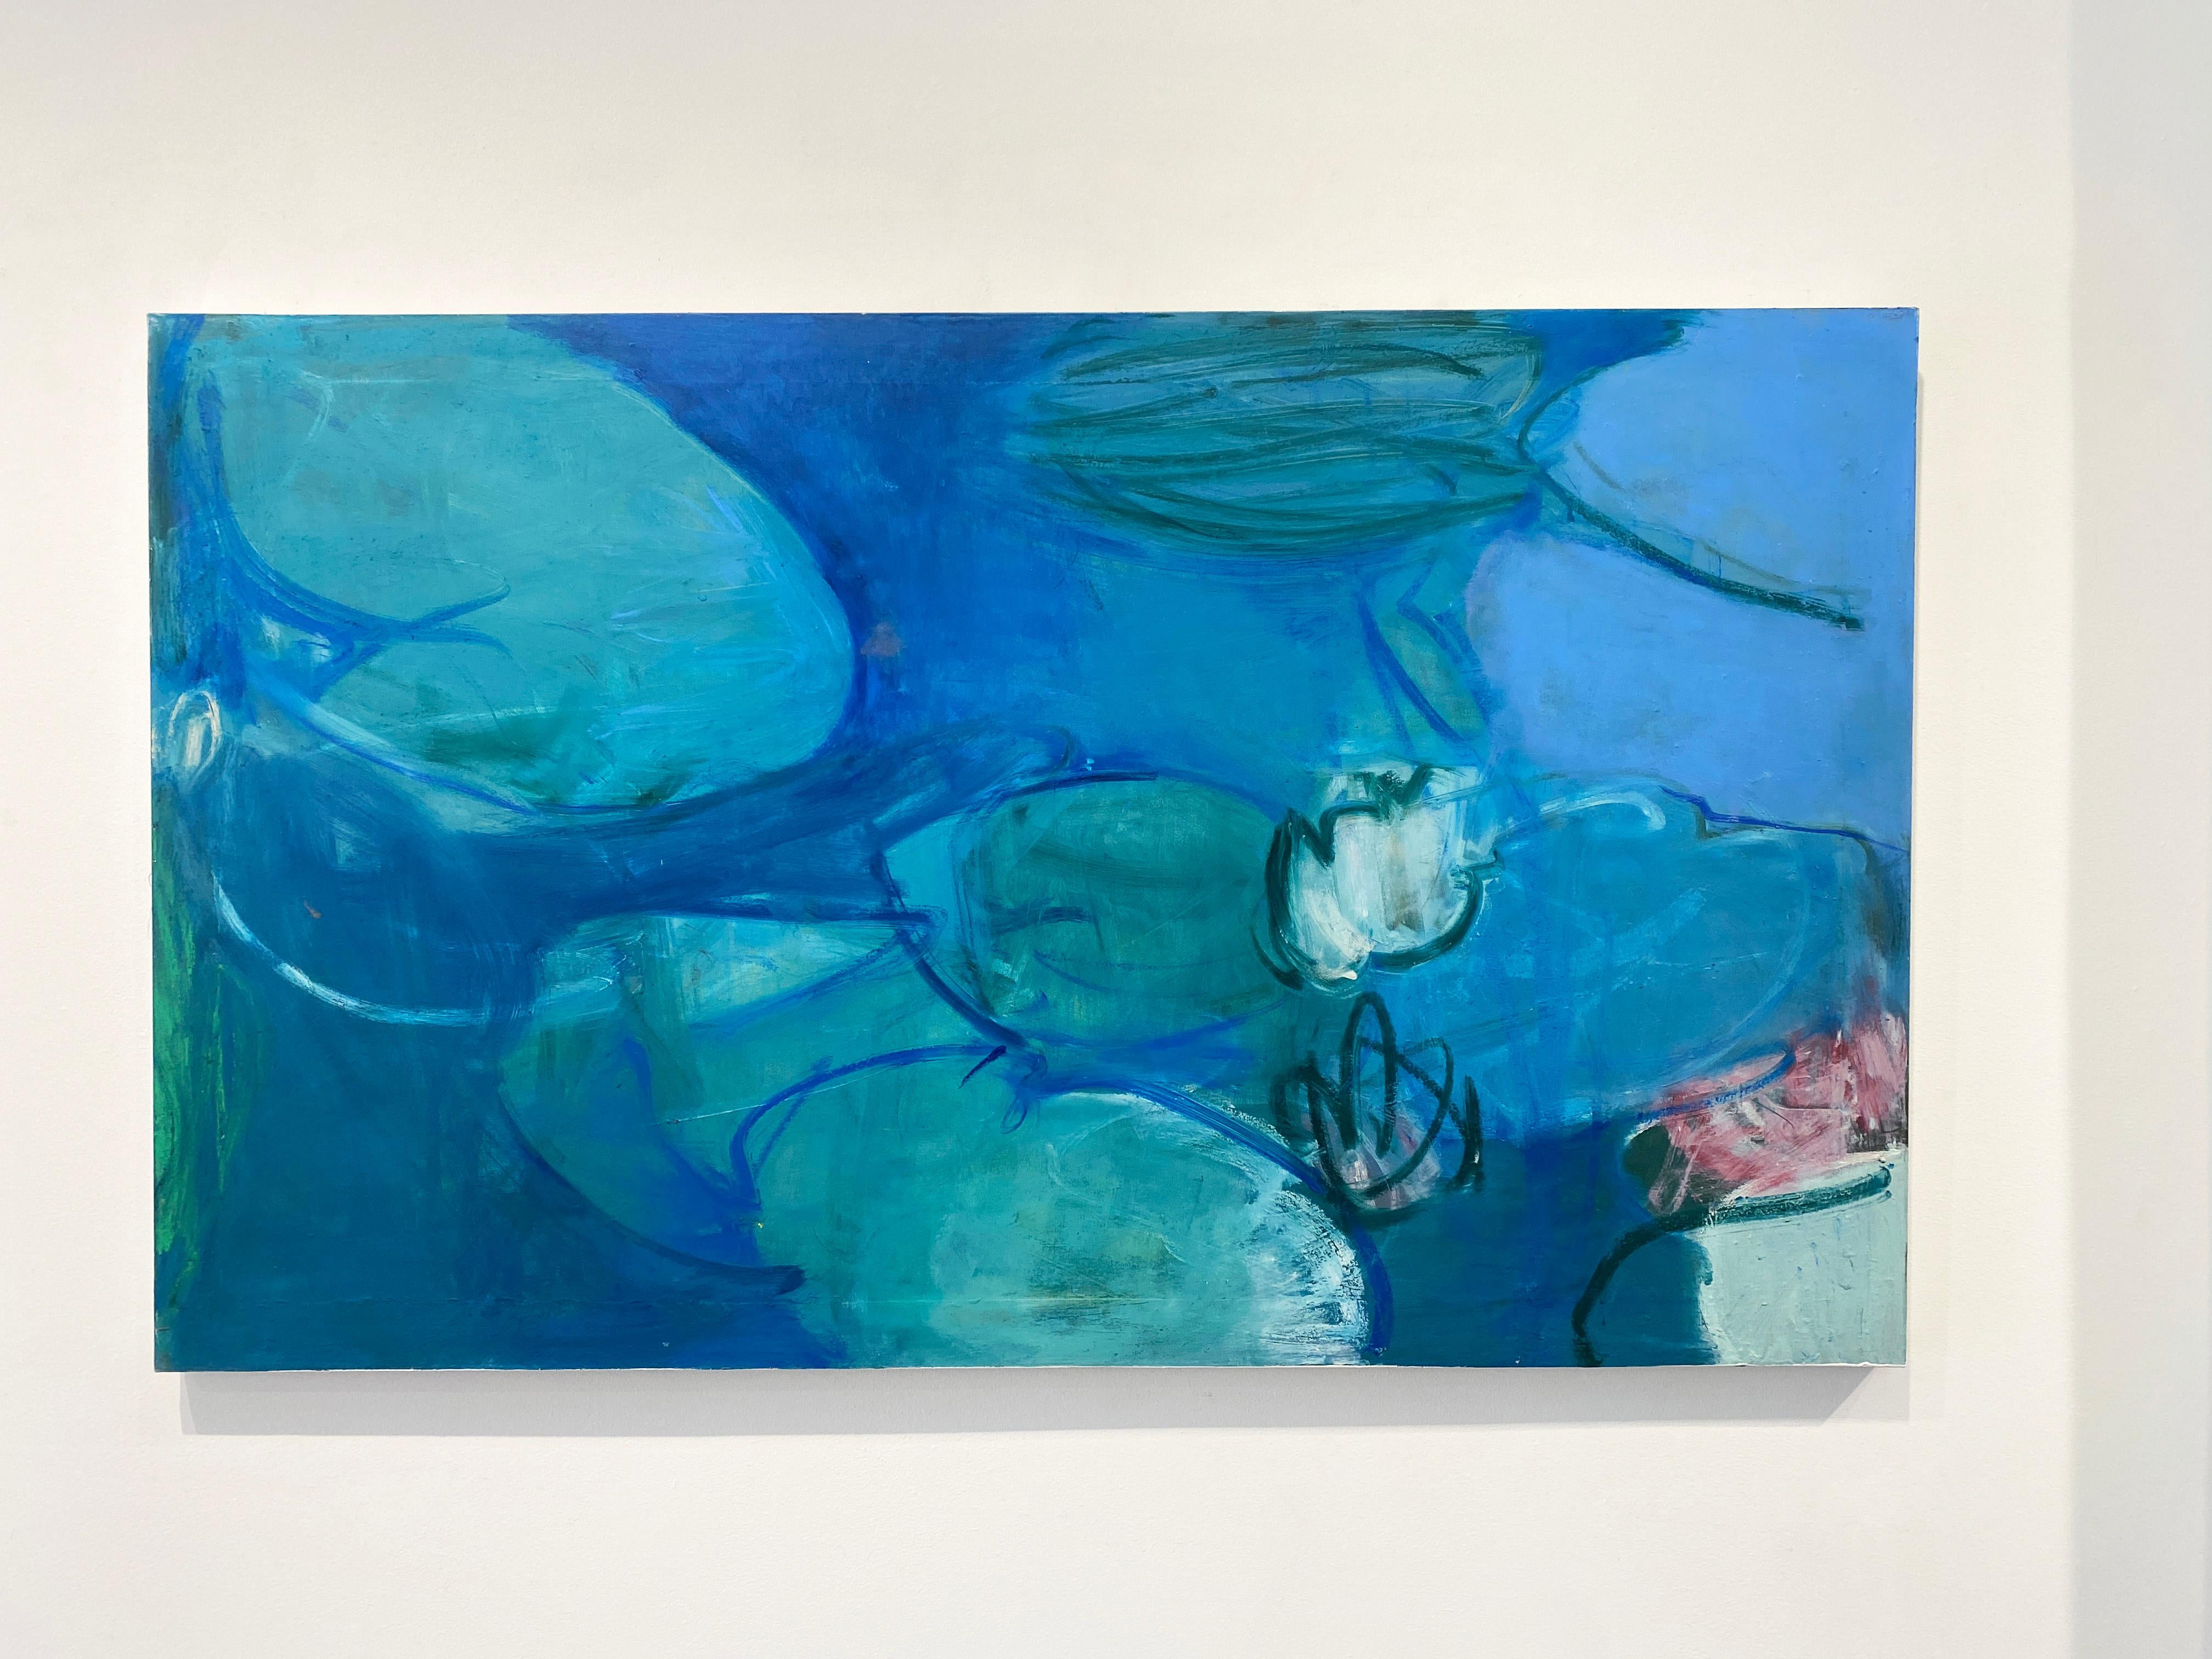 'Untitled 30' by New York City based, French artist Sandrine Kern. 2022. Oil and cold wax on canvas, 36 x 60 in. This abstracted landscape painting features a pond and a water lily scene in deep colors of blue, green, white, and pink.

Sandrine